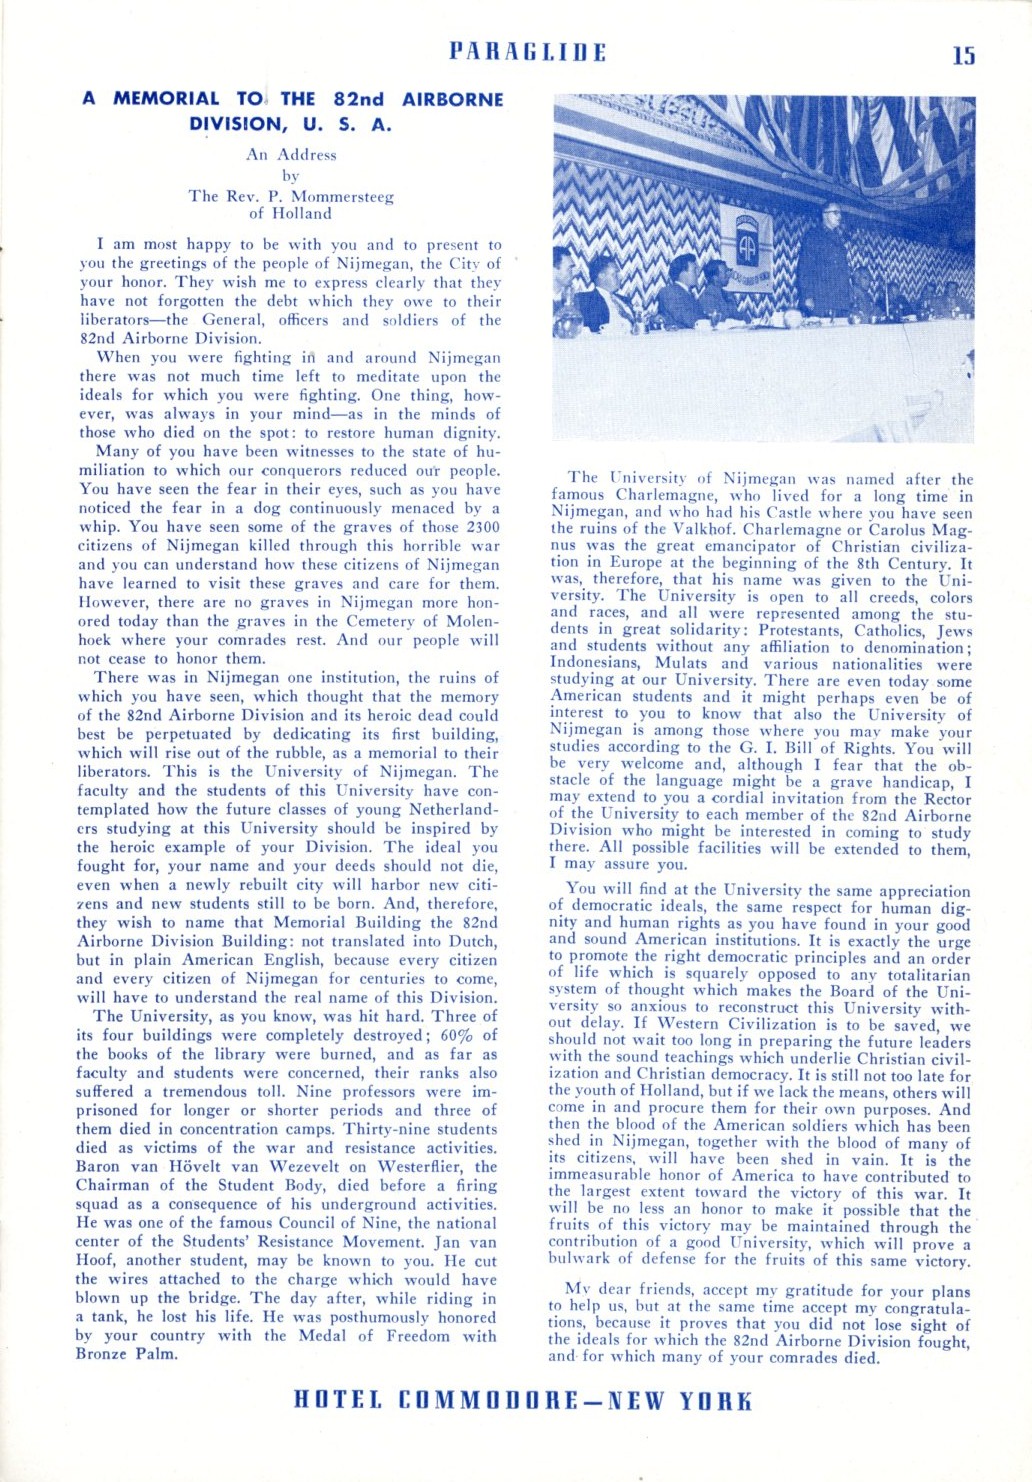 1947-Paraglide page-15